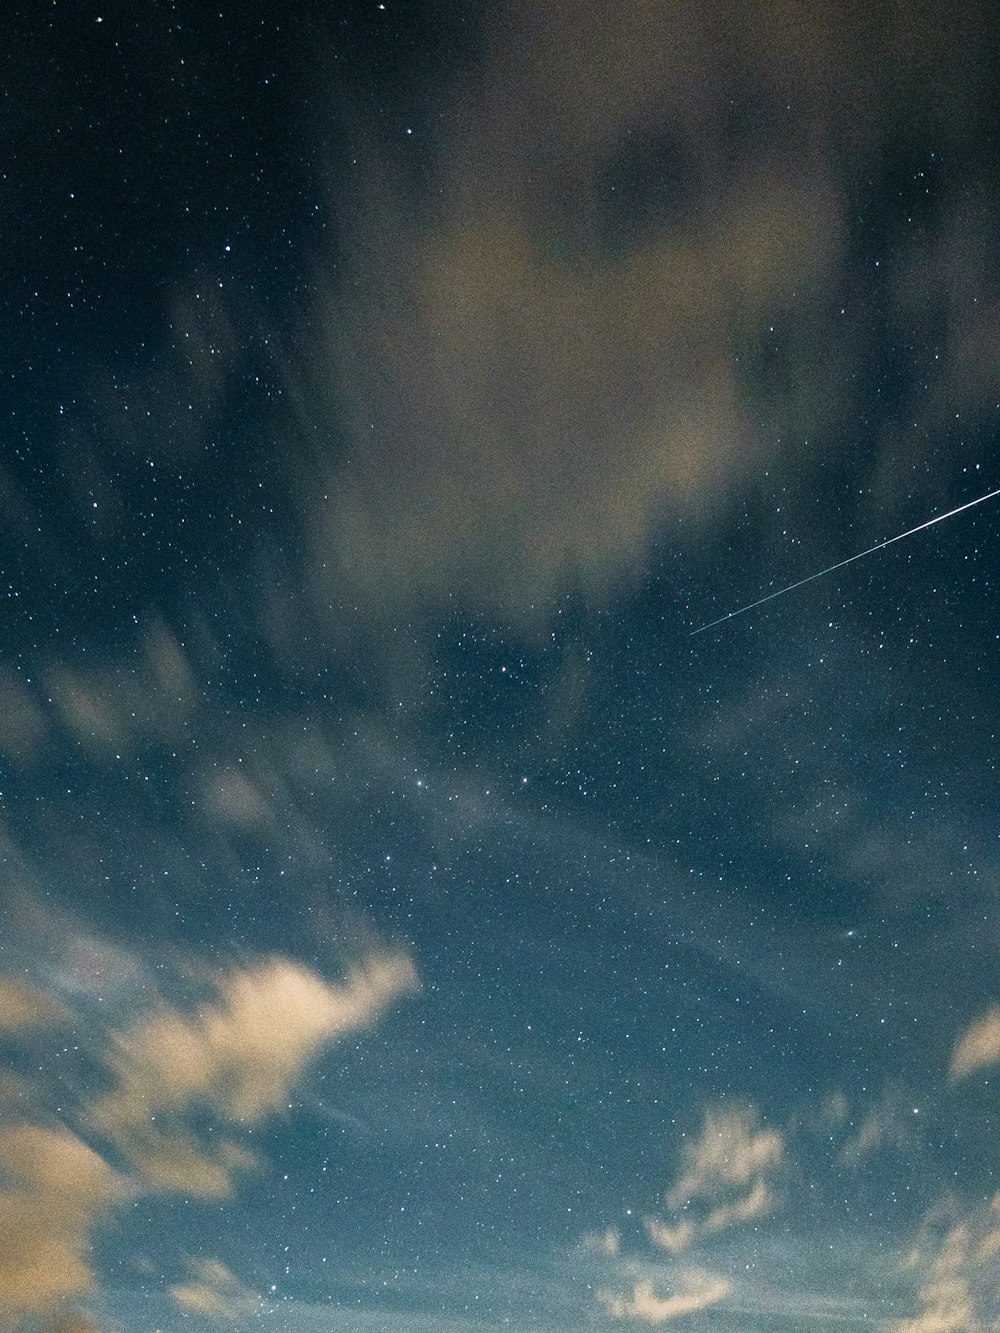 a plane flying through the night sky with stars